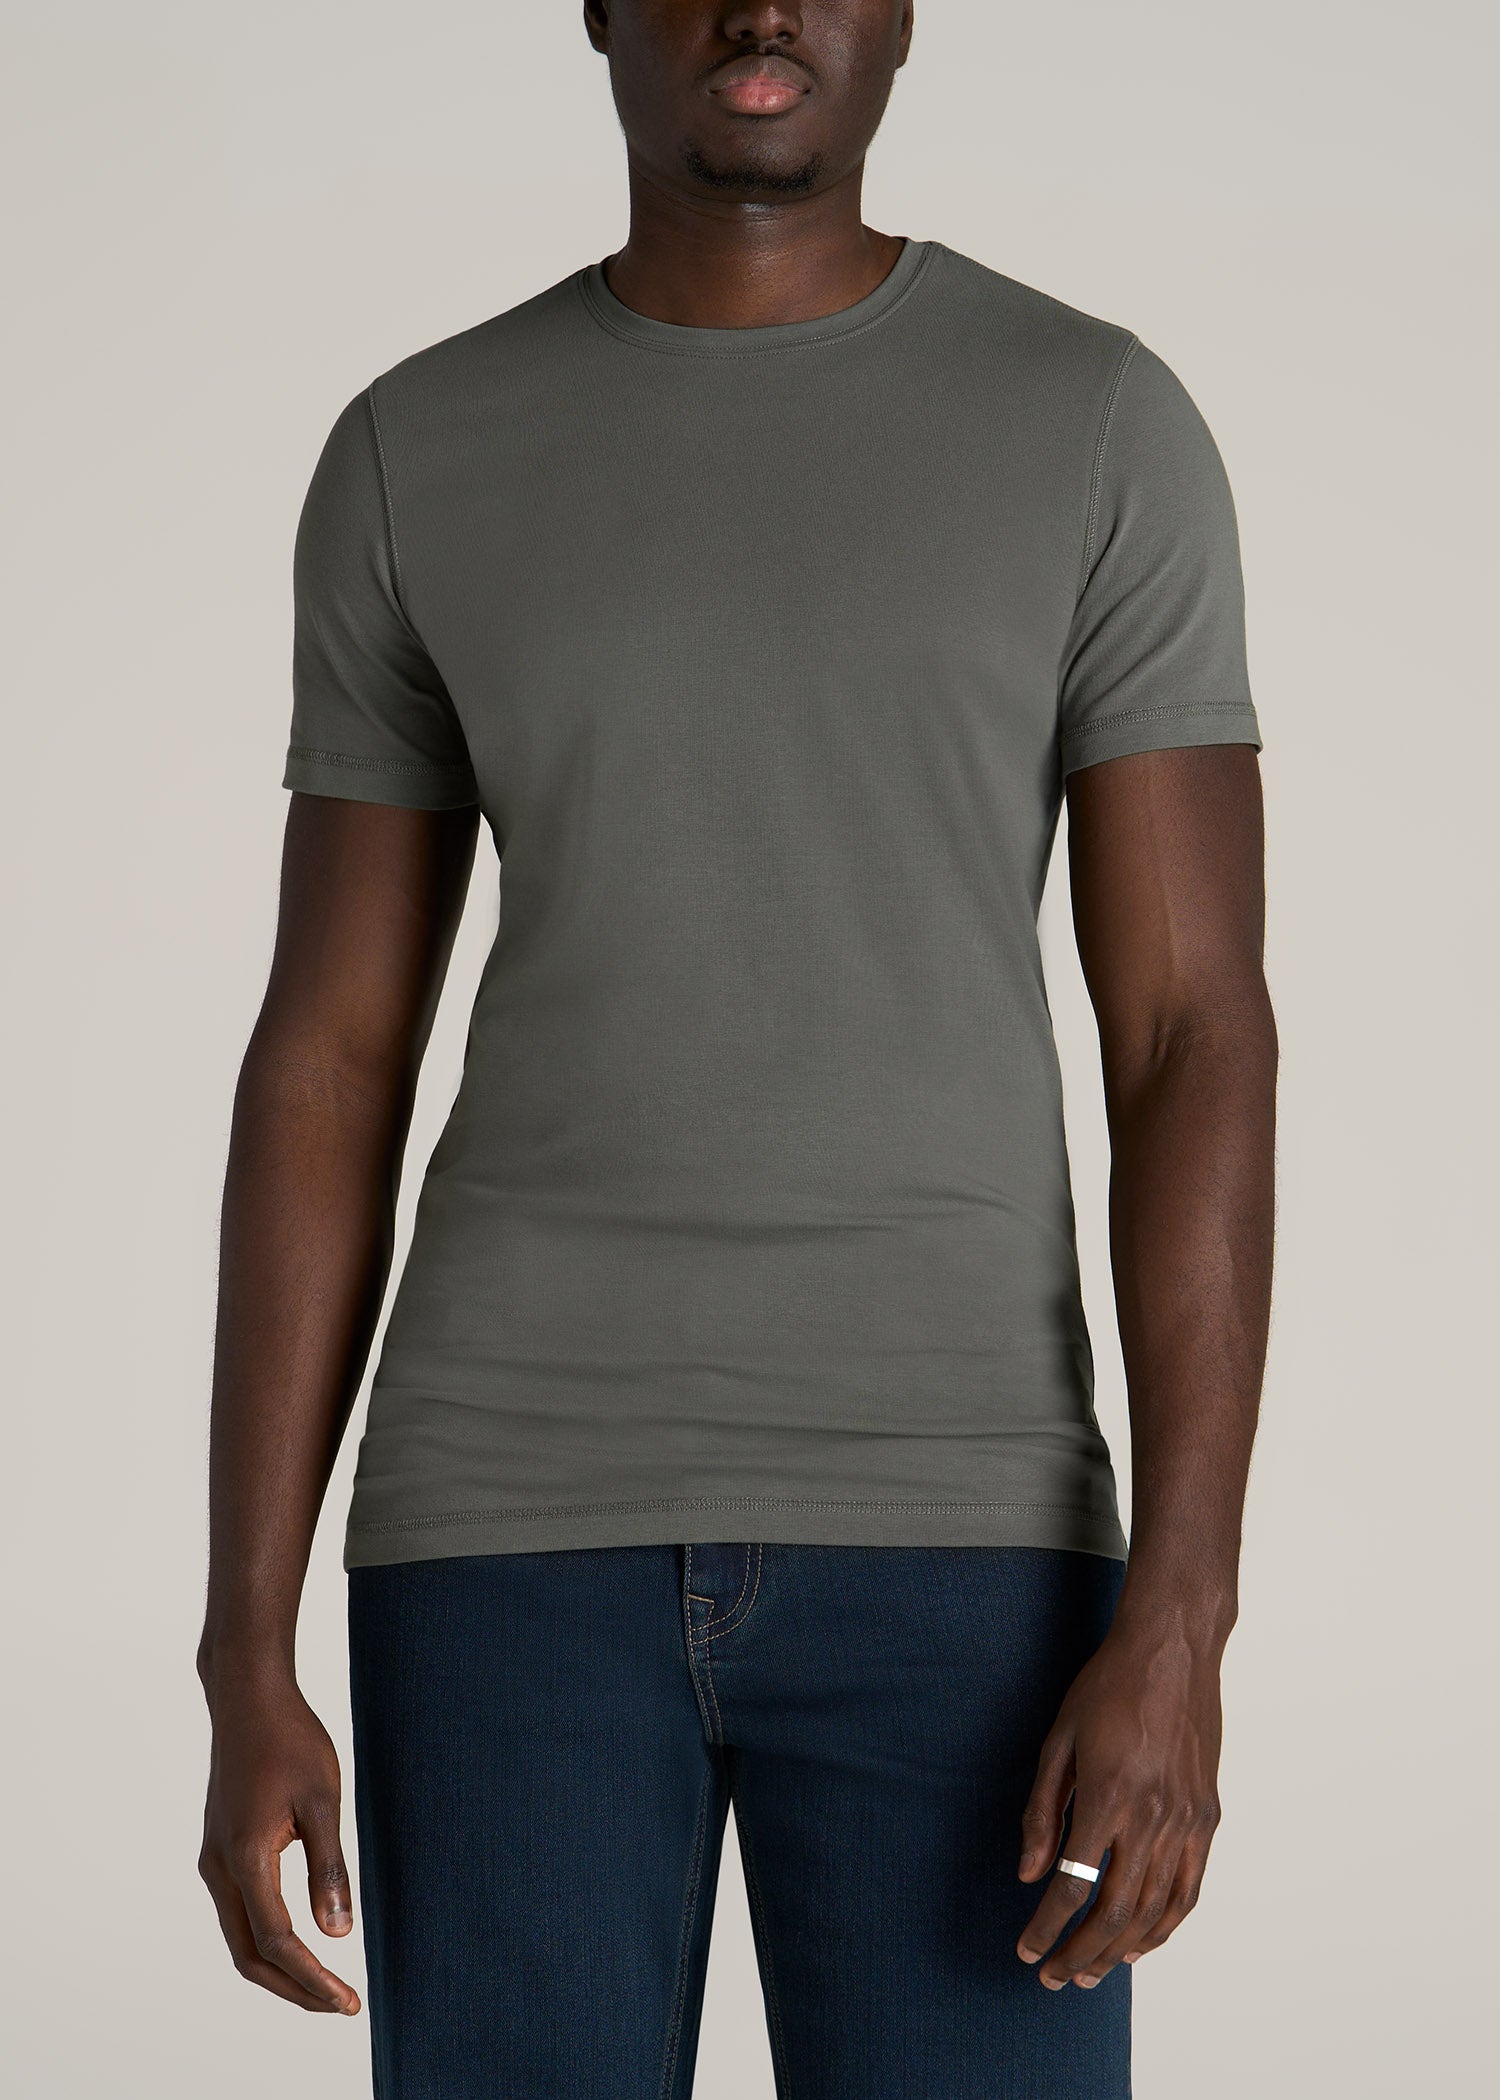 American-Tall-Men-Essential-Tees-Slim-fit-SS-Crewneck-Spring-Olive-front